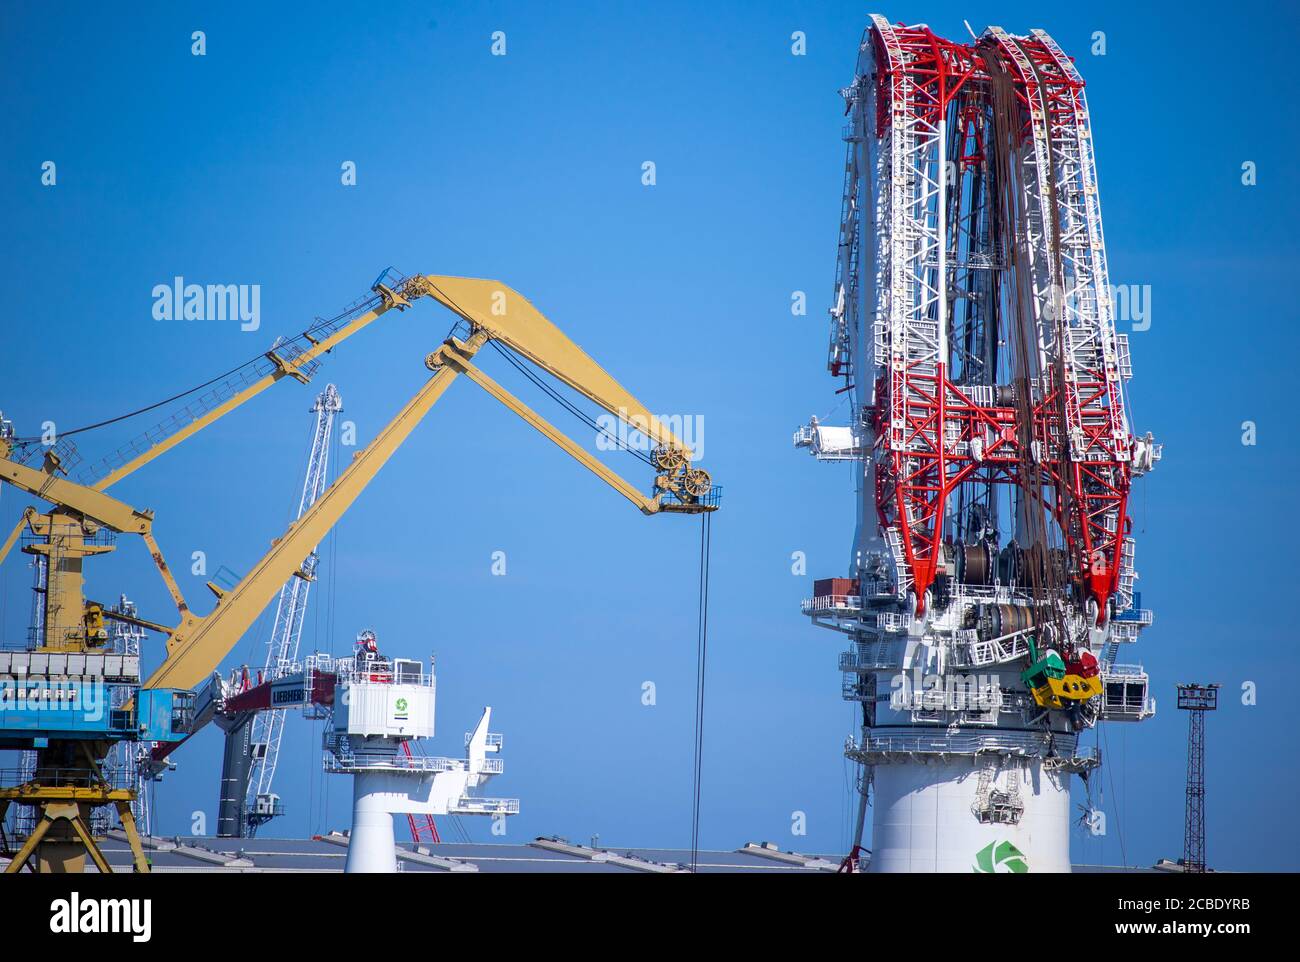 12 August 2020, Mecklenburg-Western Pomerania, Rostock: On the special ship "Orion" in the port of Rostock stands the ship crane of crane manufacturer Liebherr, which was damaged during a load test. Final recovery of the HLC 295000 crane is expected at the end of the year. According to the current state of investigations, authorities and experts are unanimous in assuming a broken crane hook as the cause of the accident. The company stated that the damage was in the high double-digit millions. The test carried out on 02.05.2020 was the last in a series of tests and was designed for a load of 5, Stock Photo